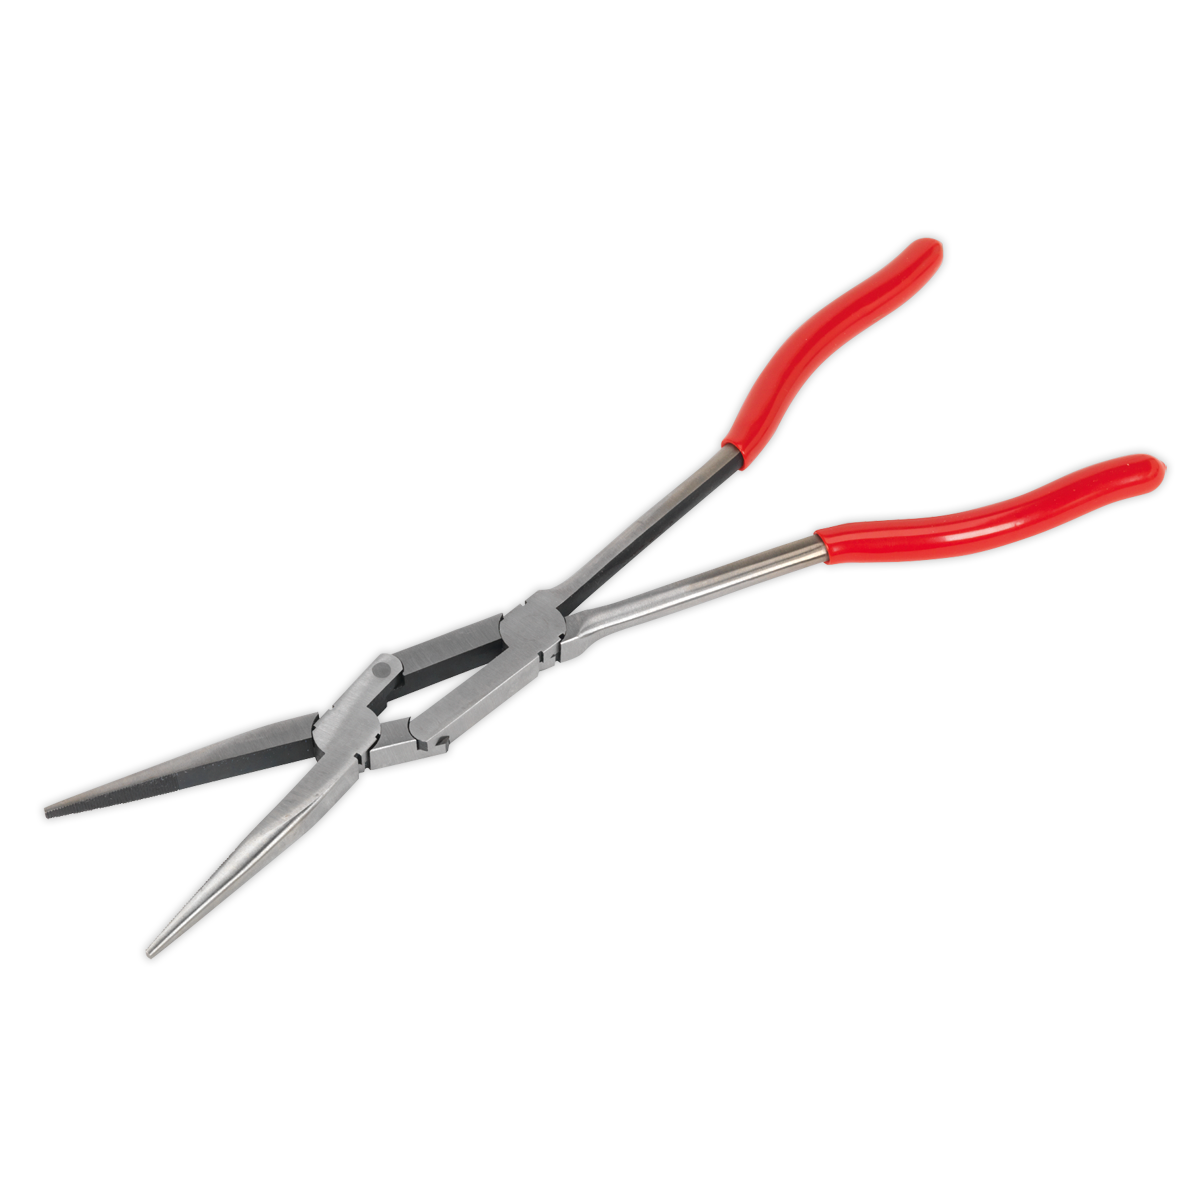 Sealey 335mm Double Joint Needle Nose Pliers AK8591